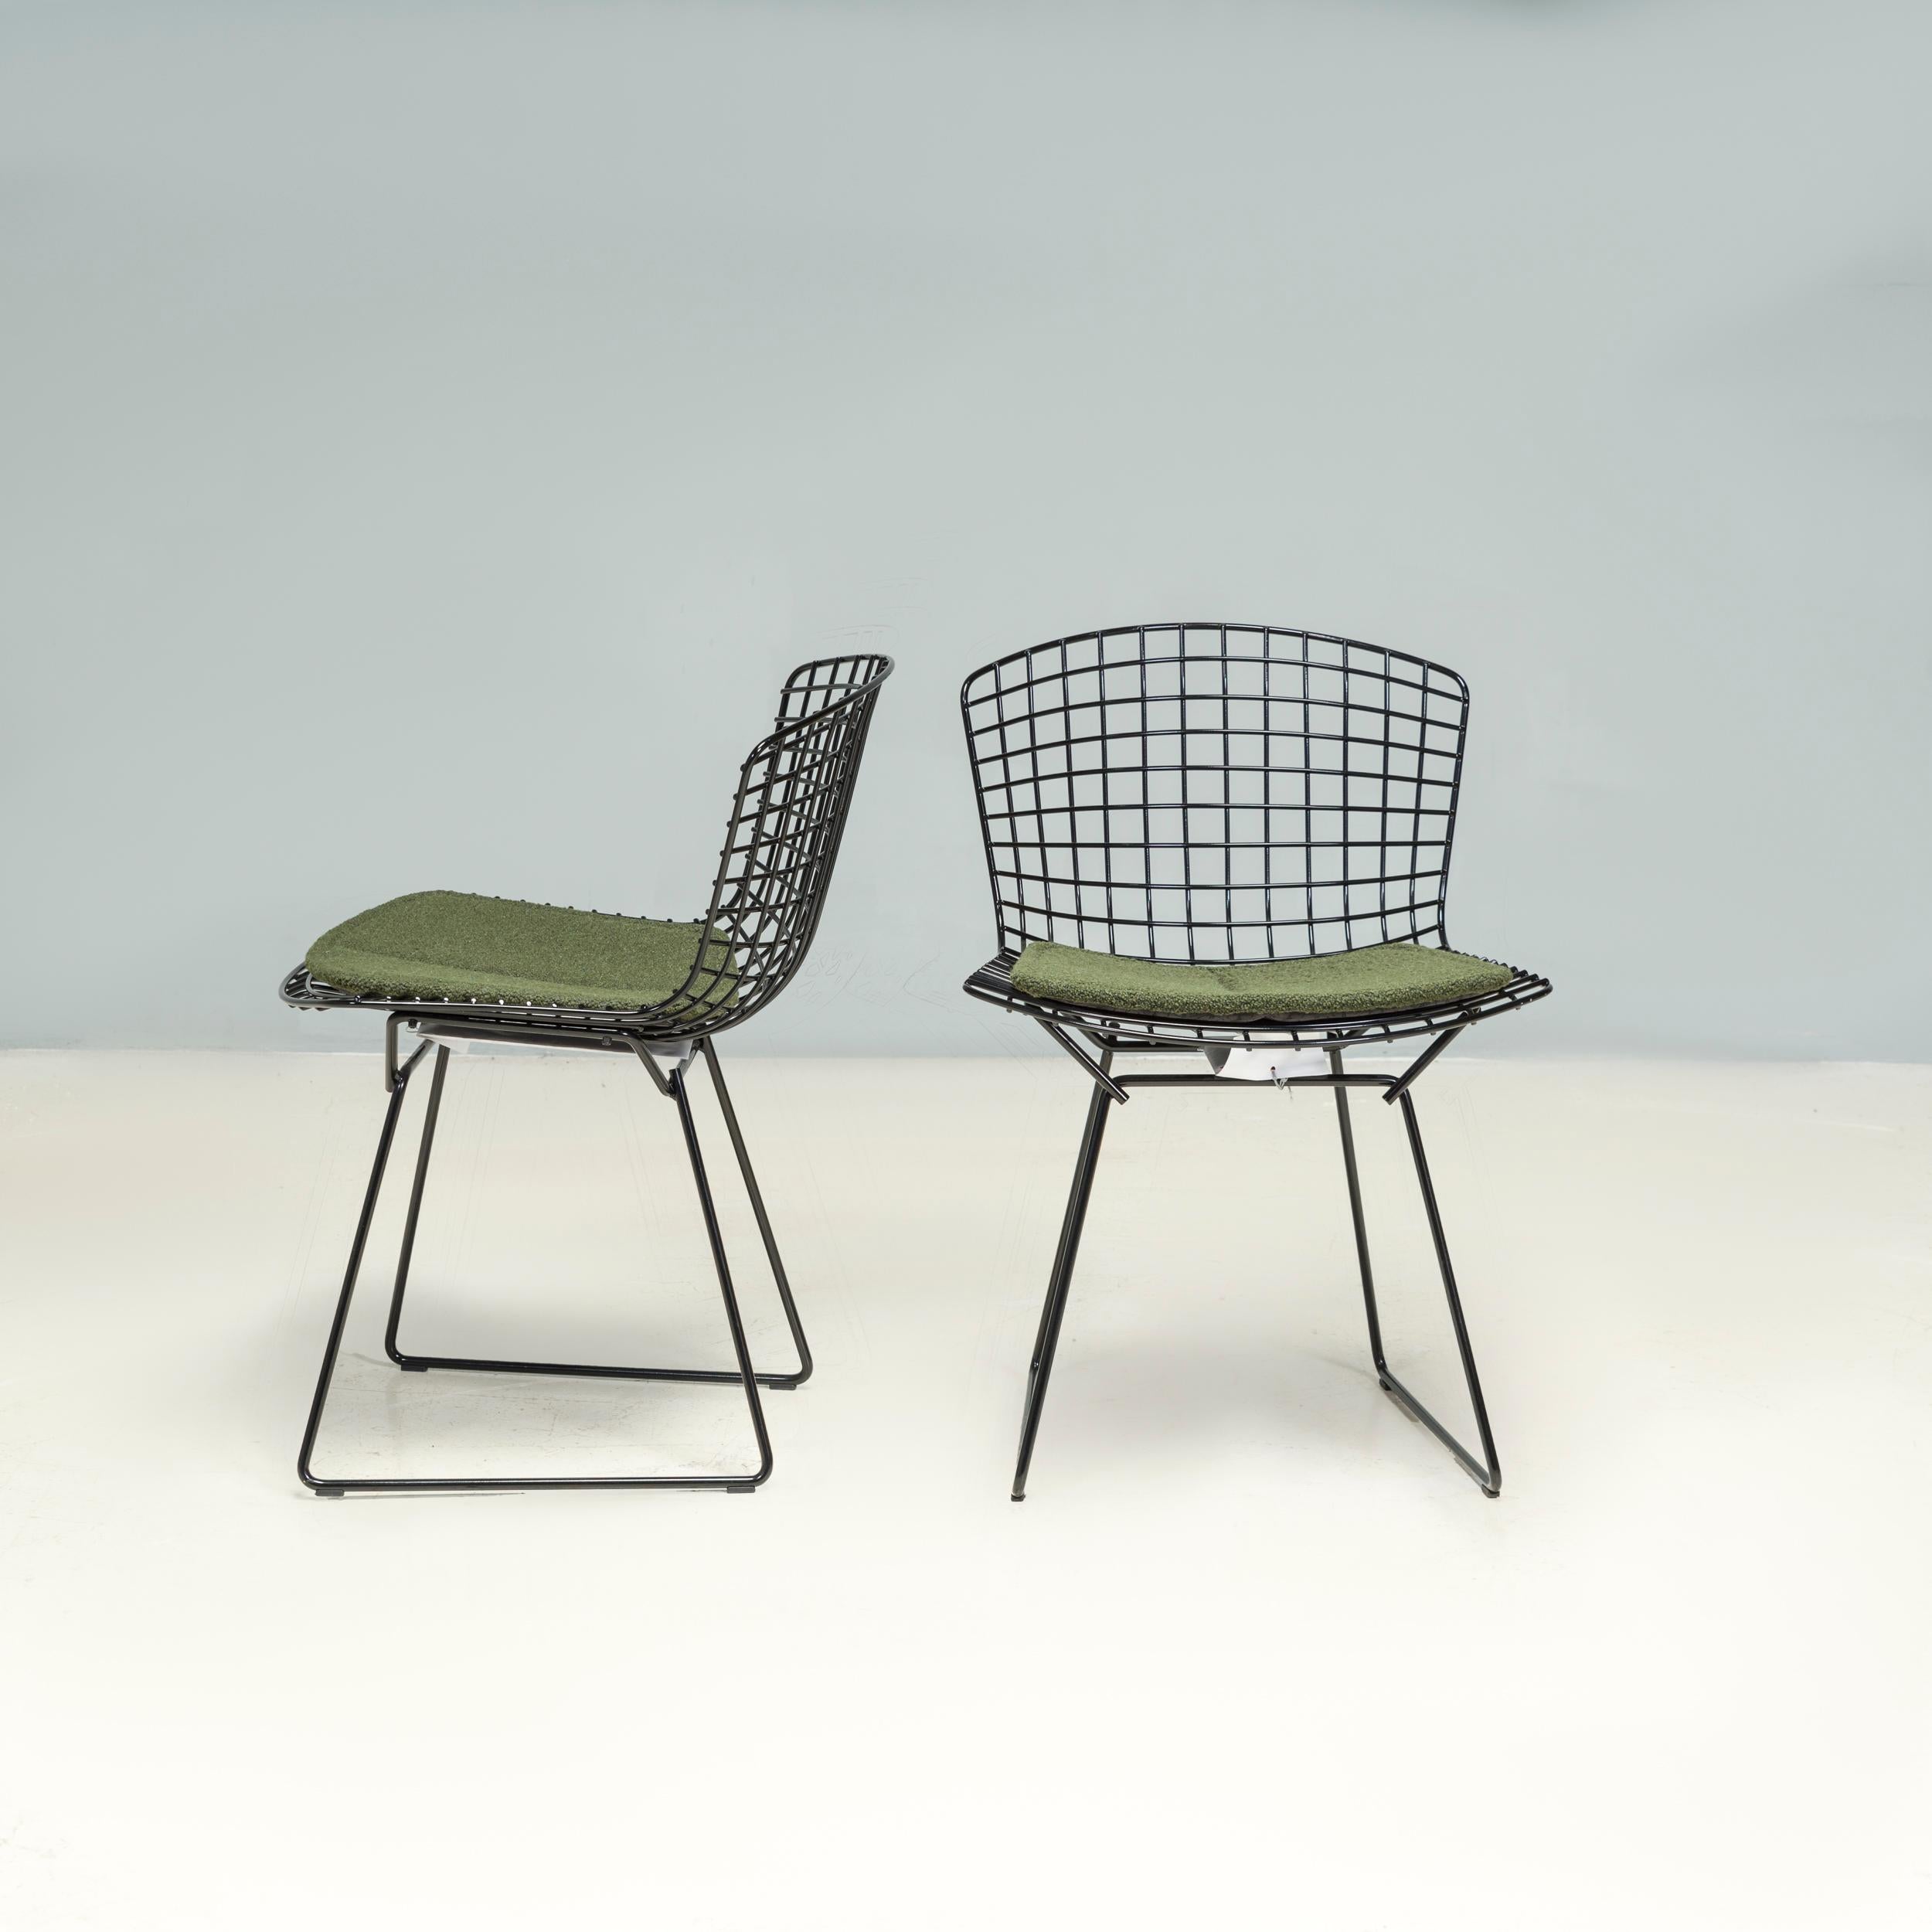 Originally designed by Harry Bertoia in 1952 his namesake collection has remained in production with Knoll ever since, with the side chair becoming one of the most recognisable furniture designs of the 20th century.

Constructed from an open weave